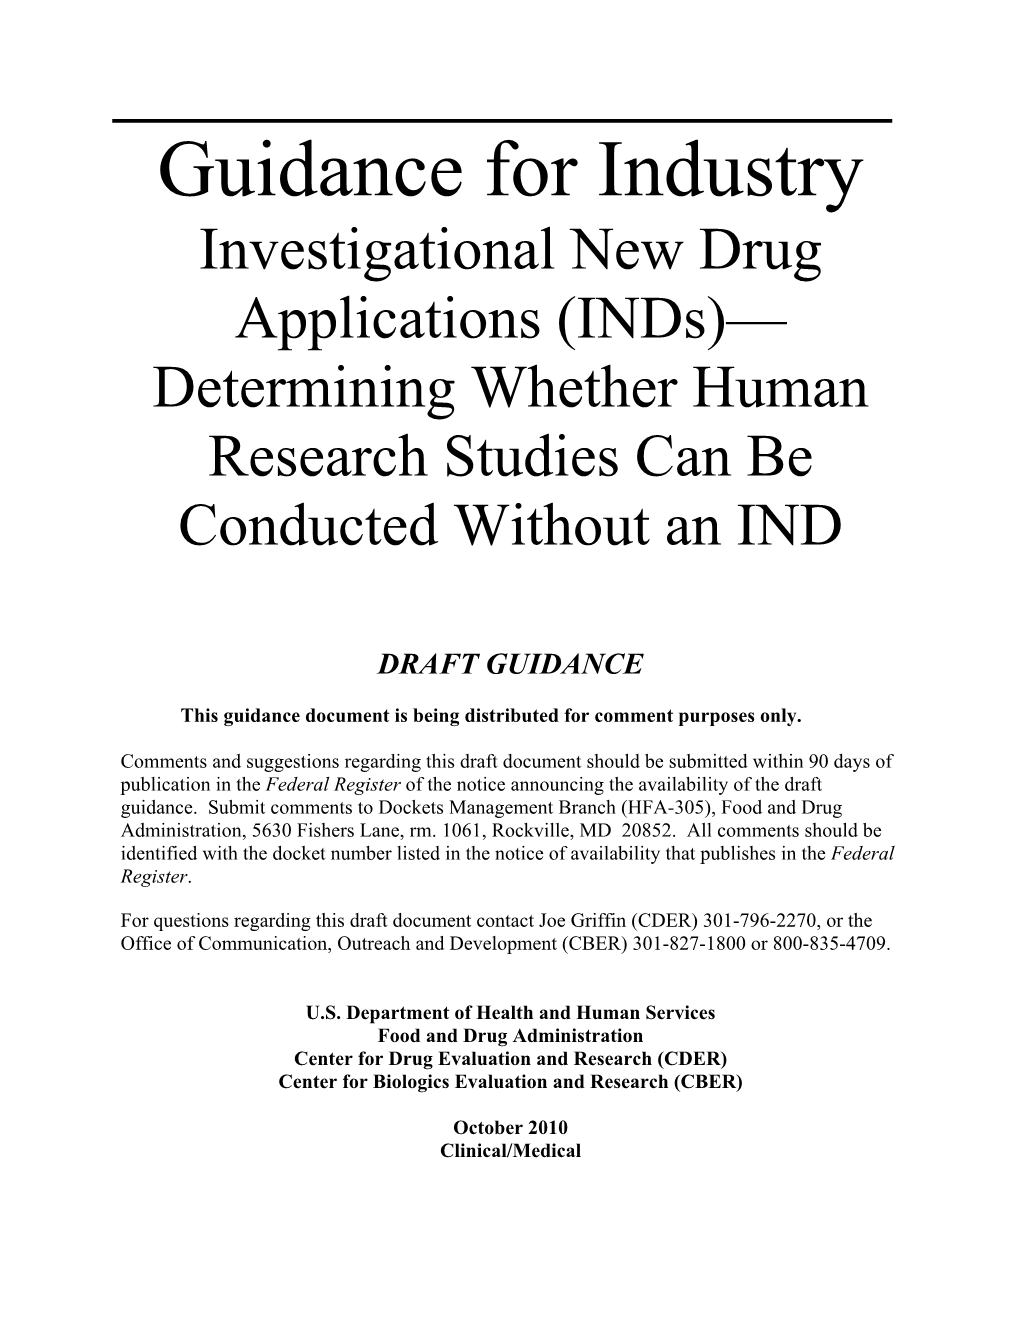 Guidance for Industry Investigational New Drug Applications (Inds)— Determining Whether Human Research Studies Can Be Conducted Without an IND